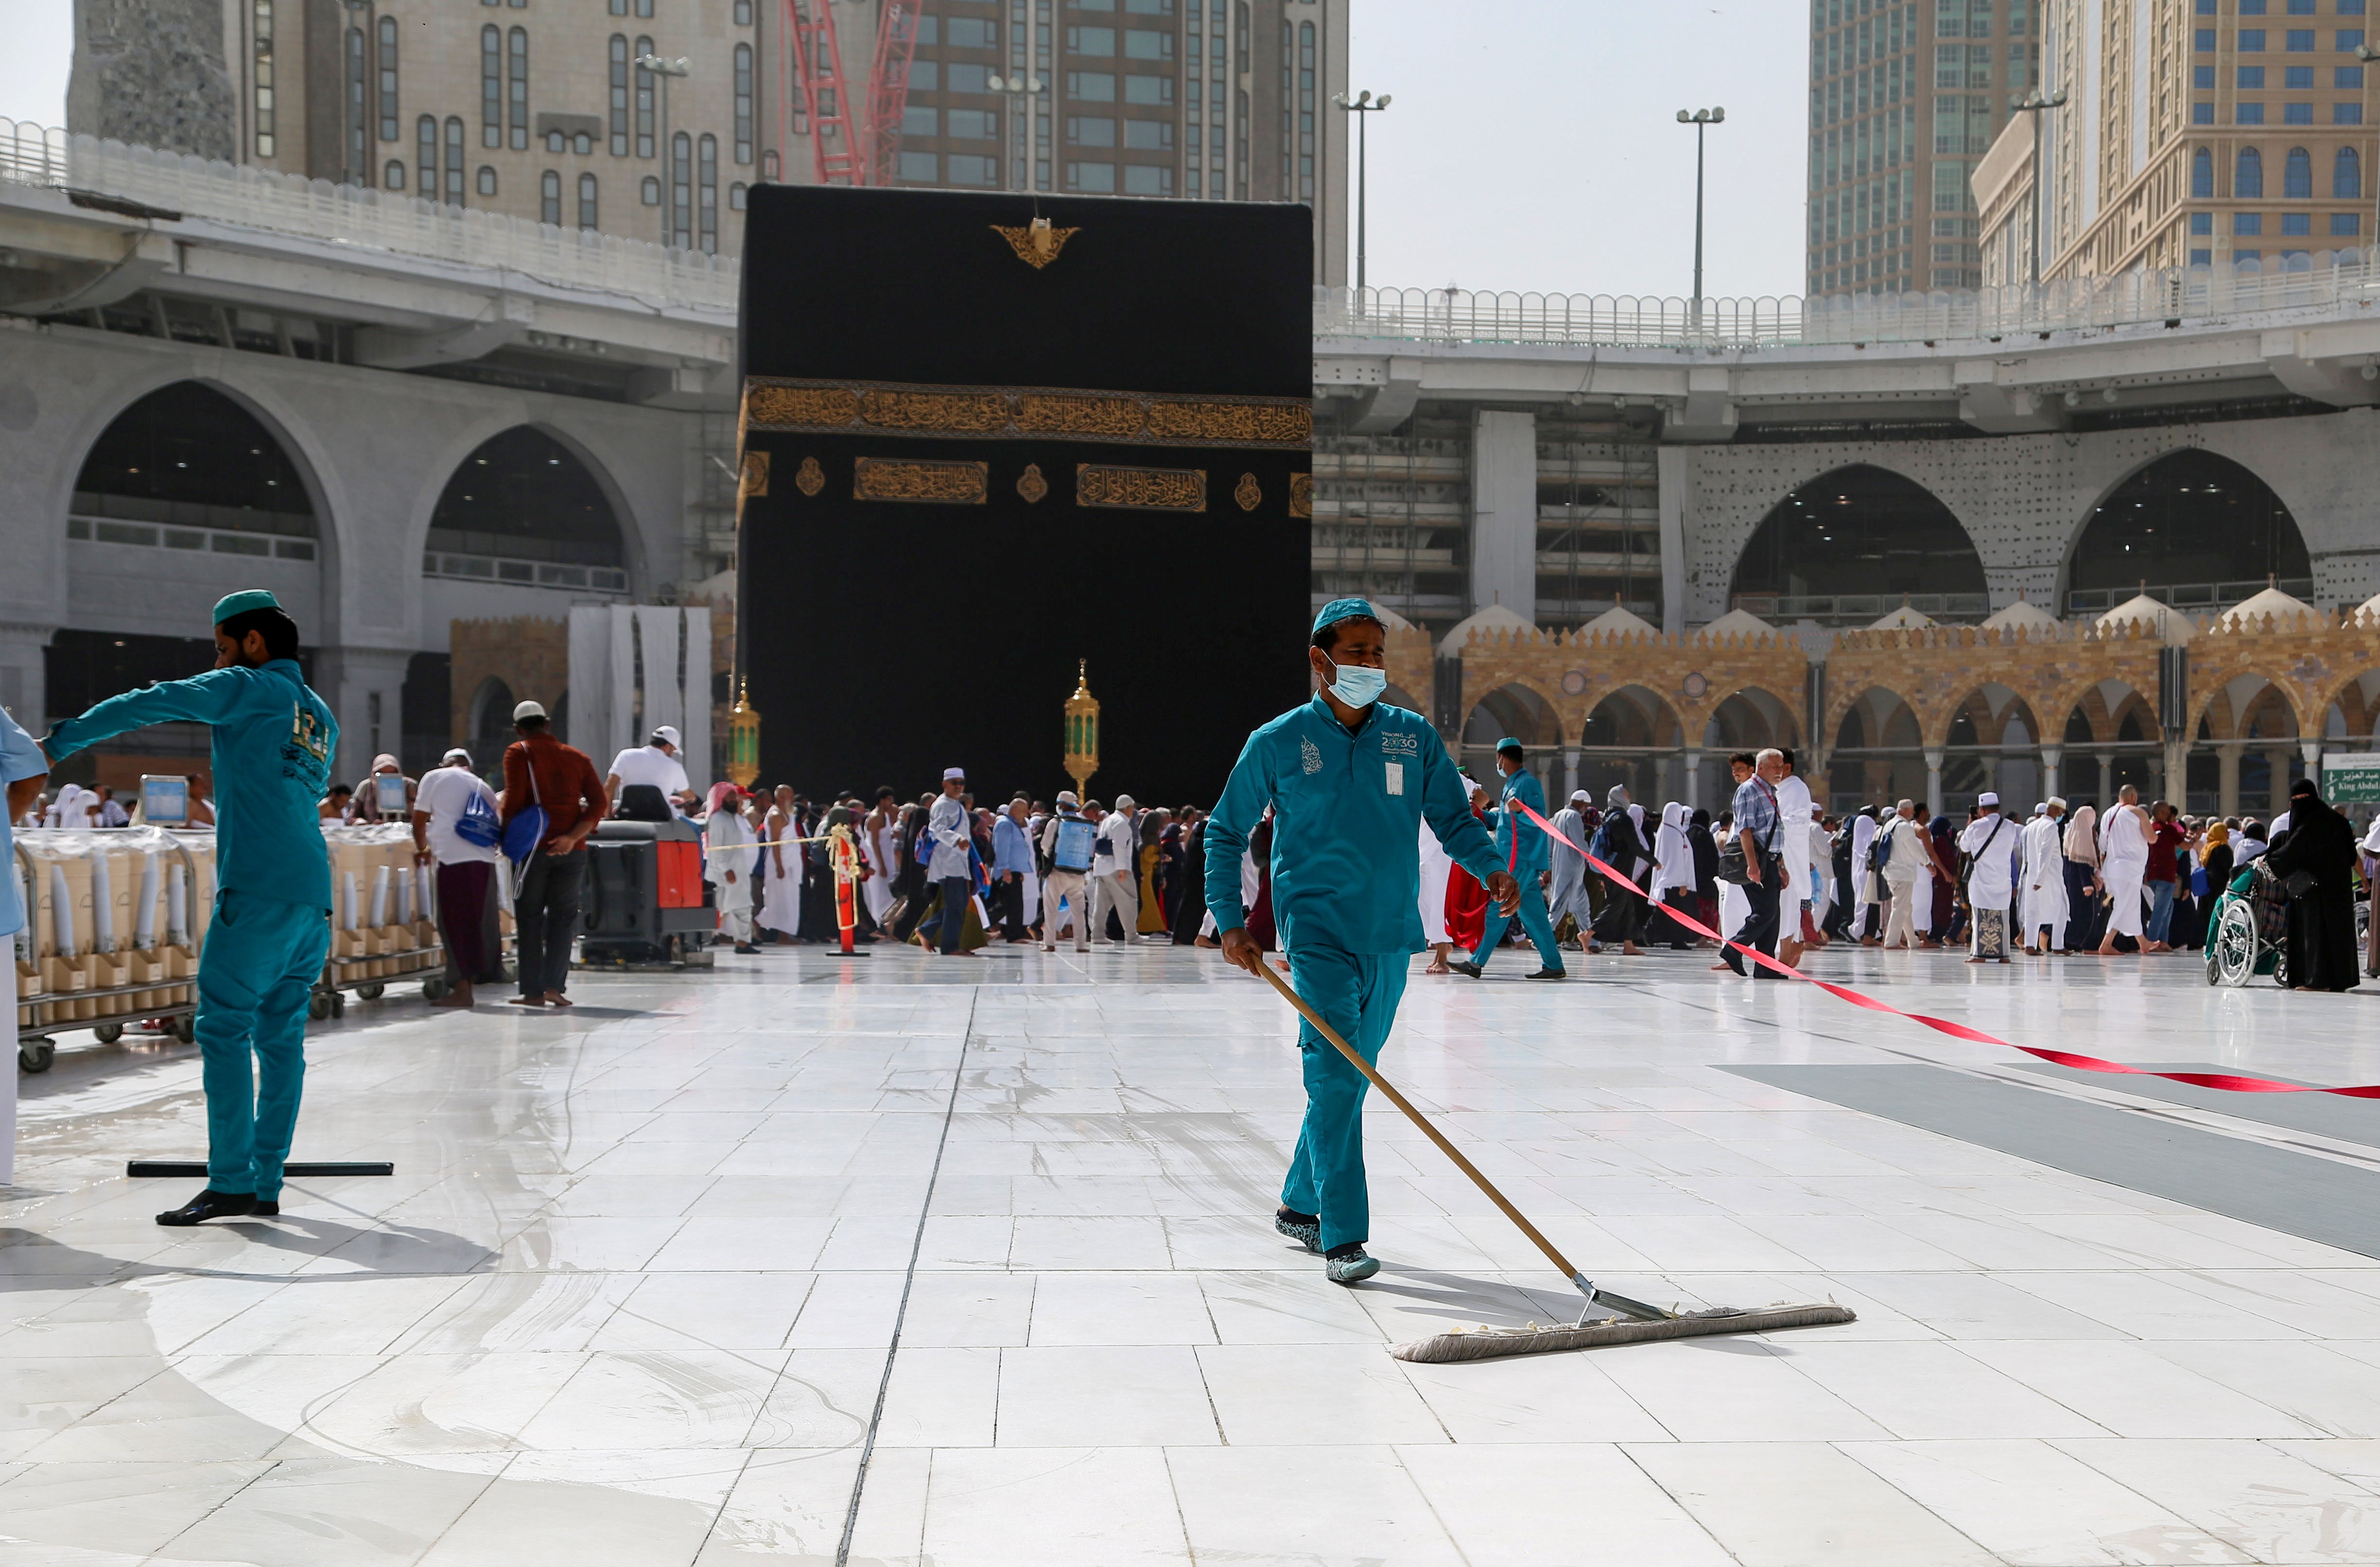 Cleaners wear protective face masks, following the outbreak of the coronavirus, as they swipe the floor at the Kaaba in the Grand mosque in the holy city of Mecca, Saudi Arabia March 3, 2020.